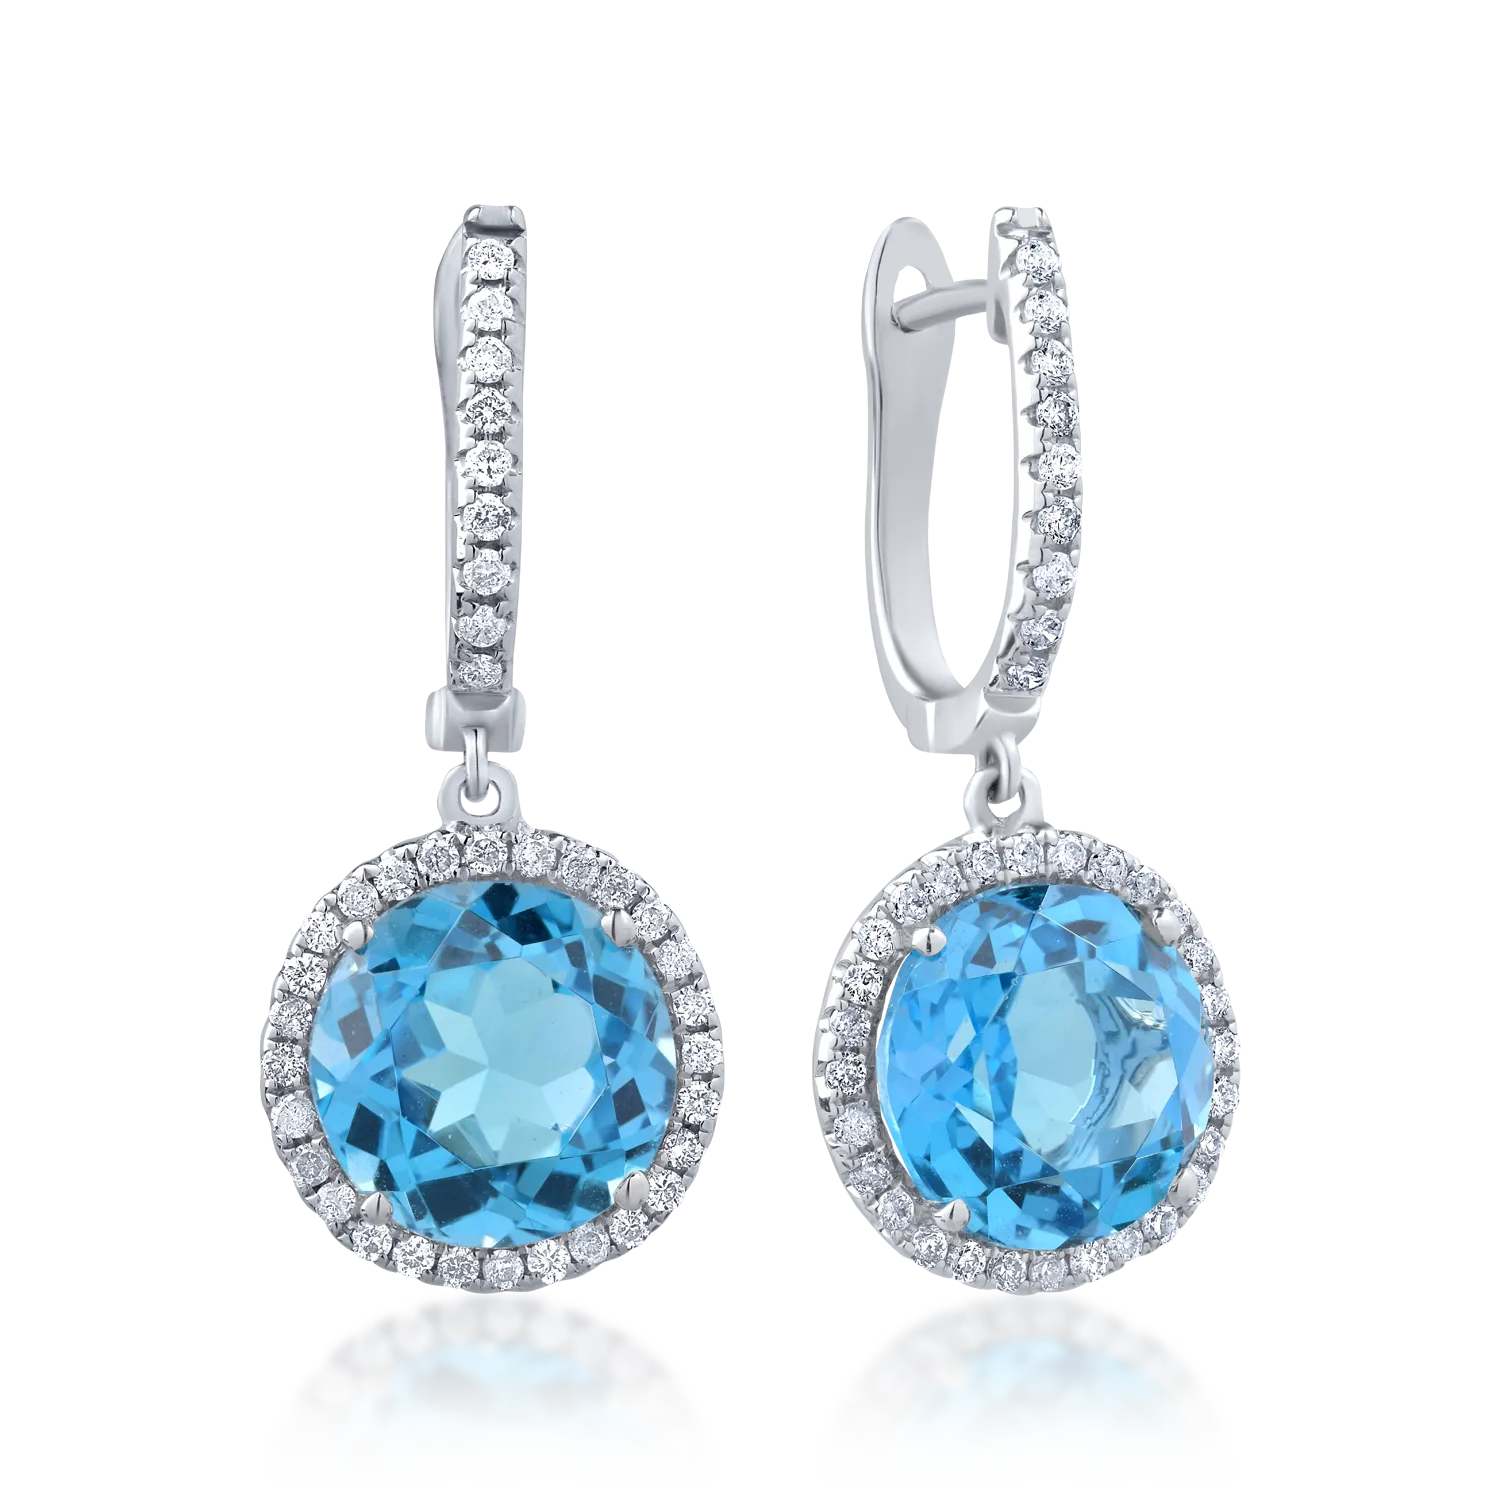 18K white gold earrings with 7.87ct blue topazes and 0.41ct diamonds